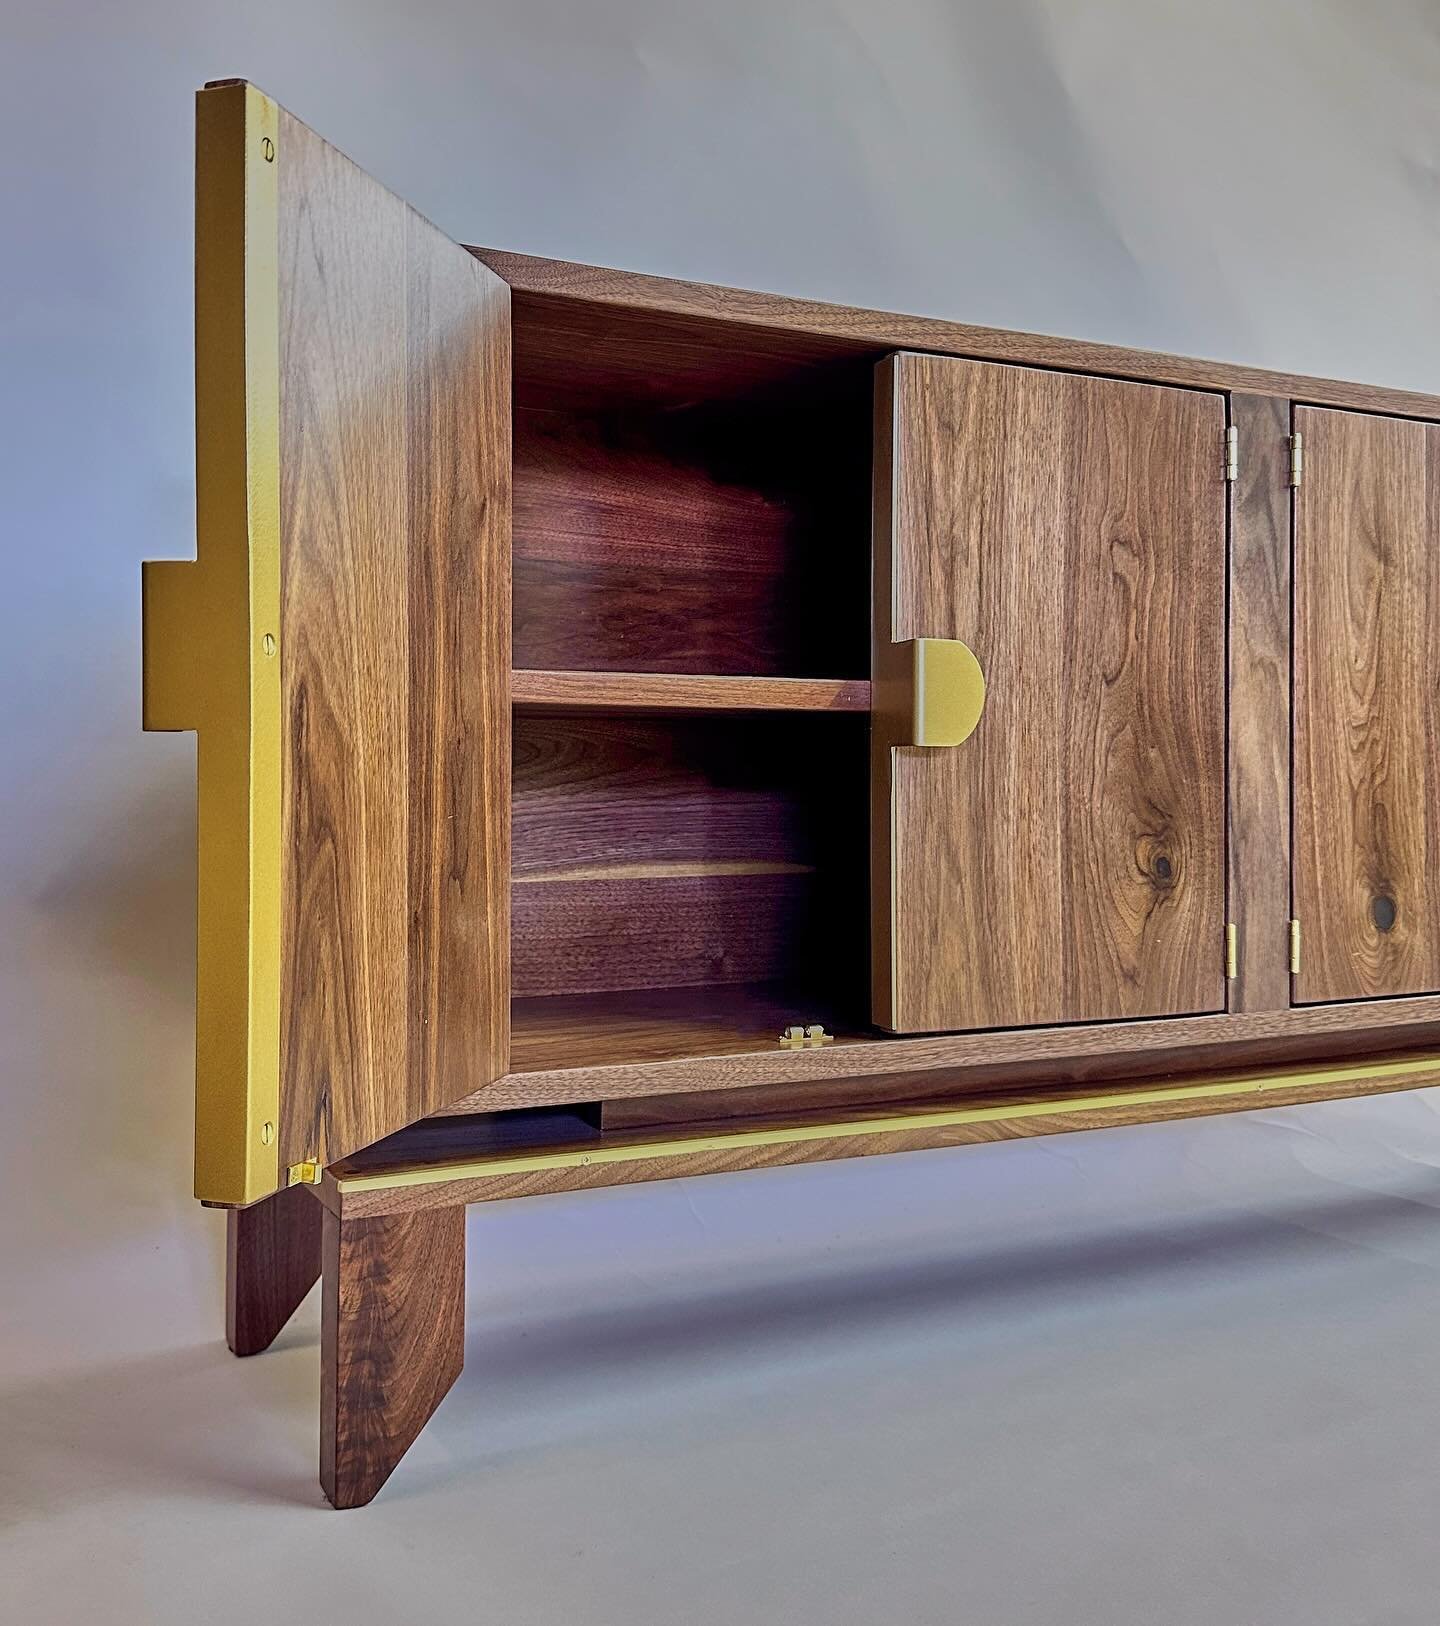 REPOSE Console. Authentic quality. Inside and out. 

#customfurniture #customfurnituredesign #furnituremaker #maker #cabinetmaker #builder #woodworking